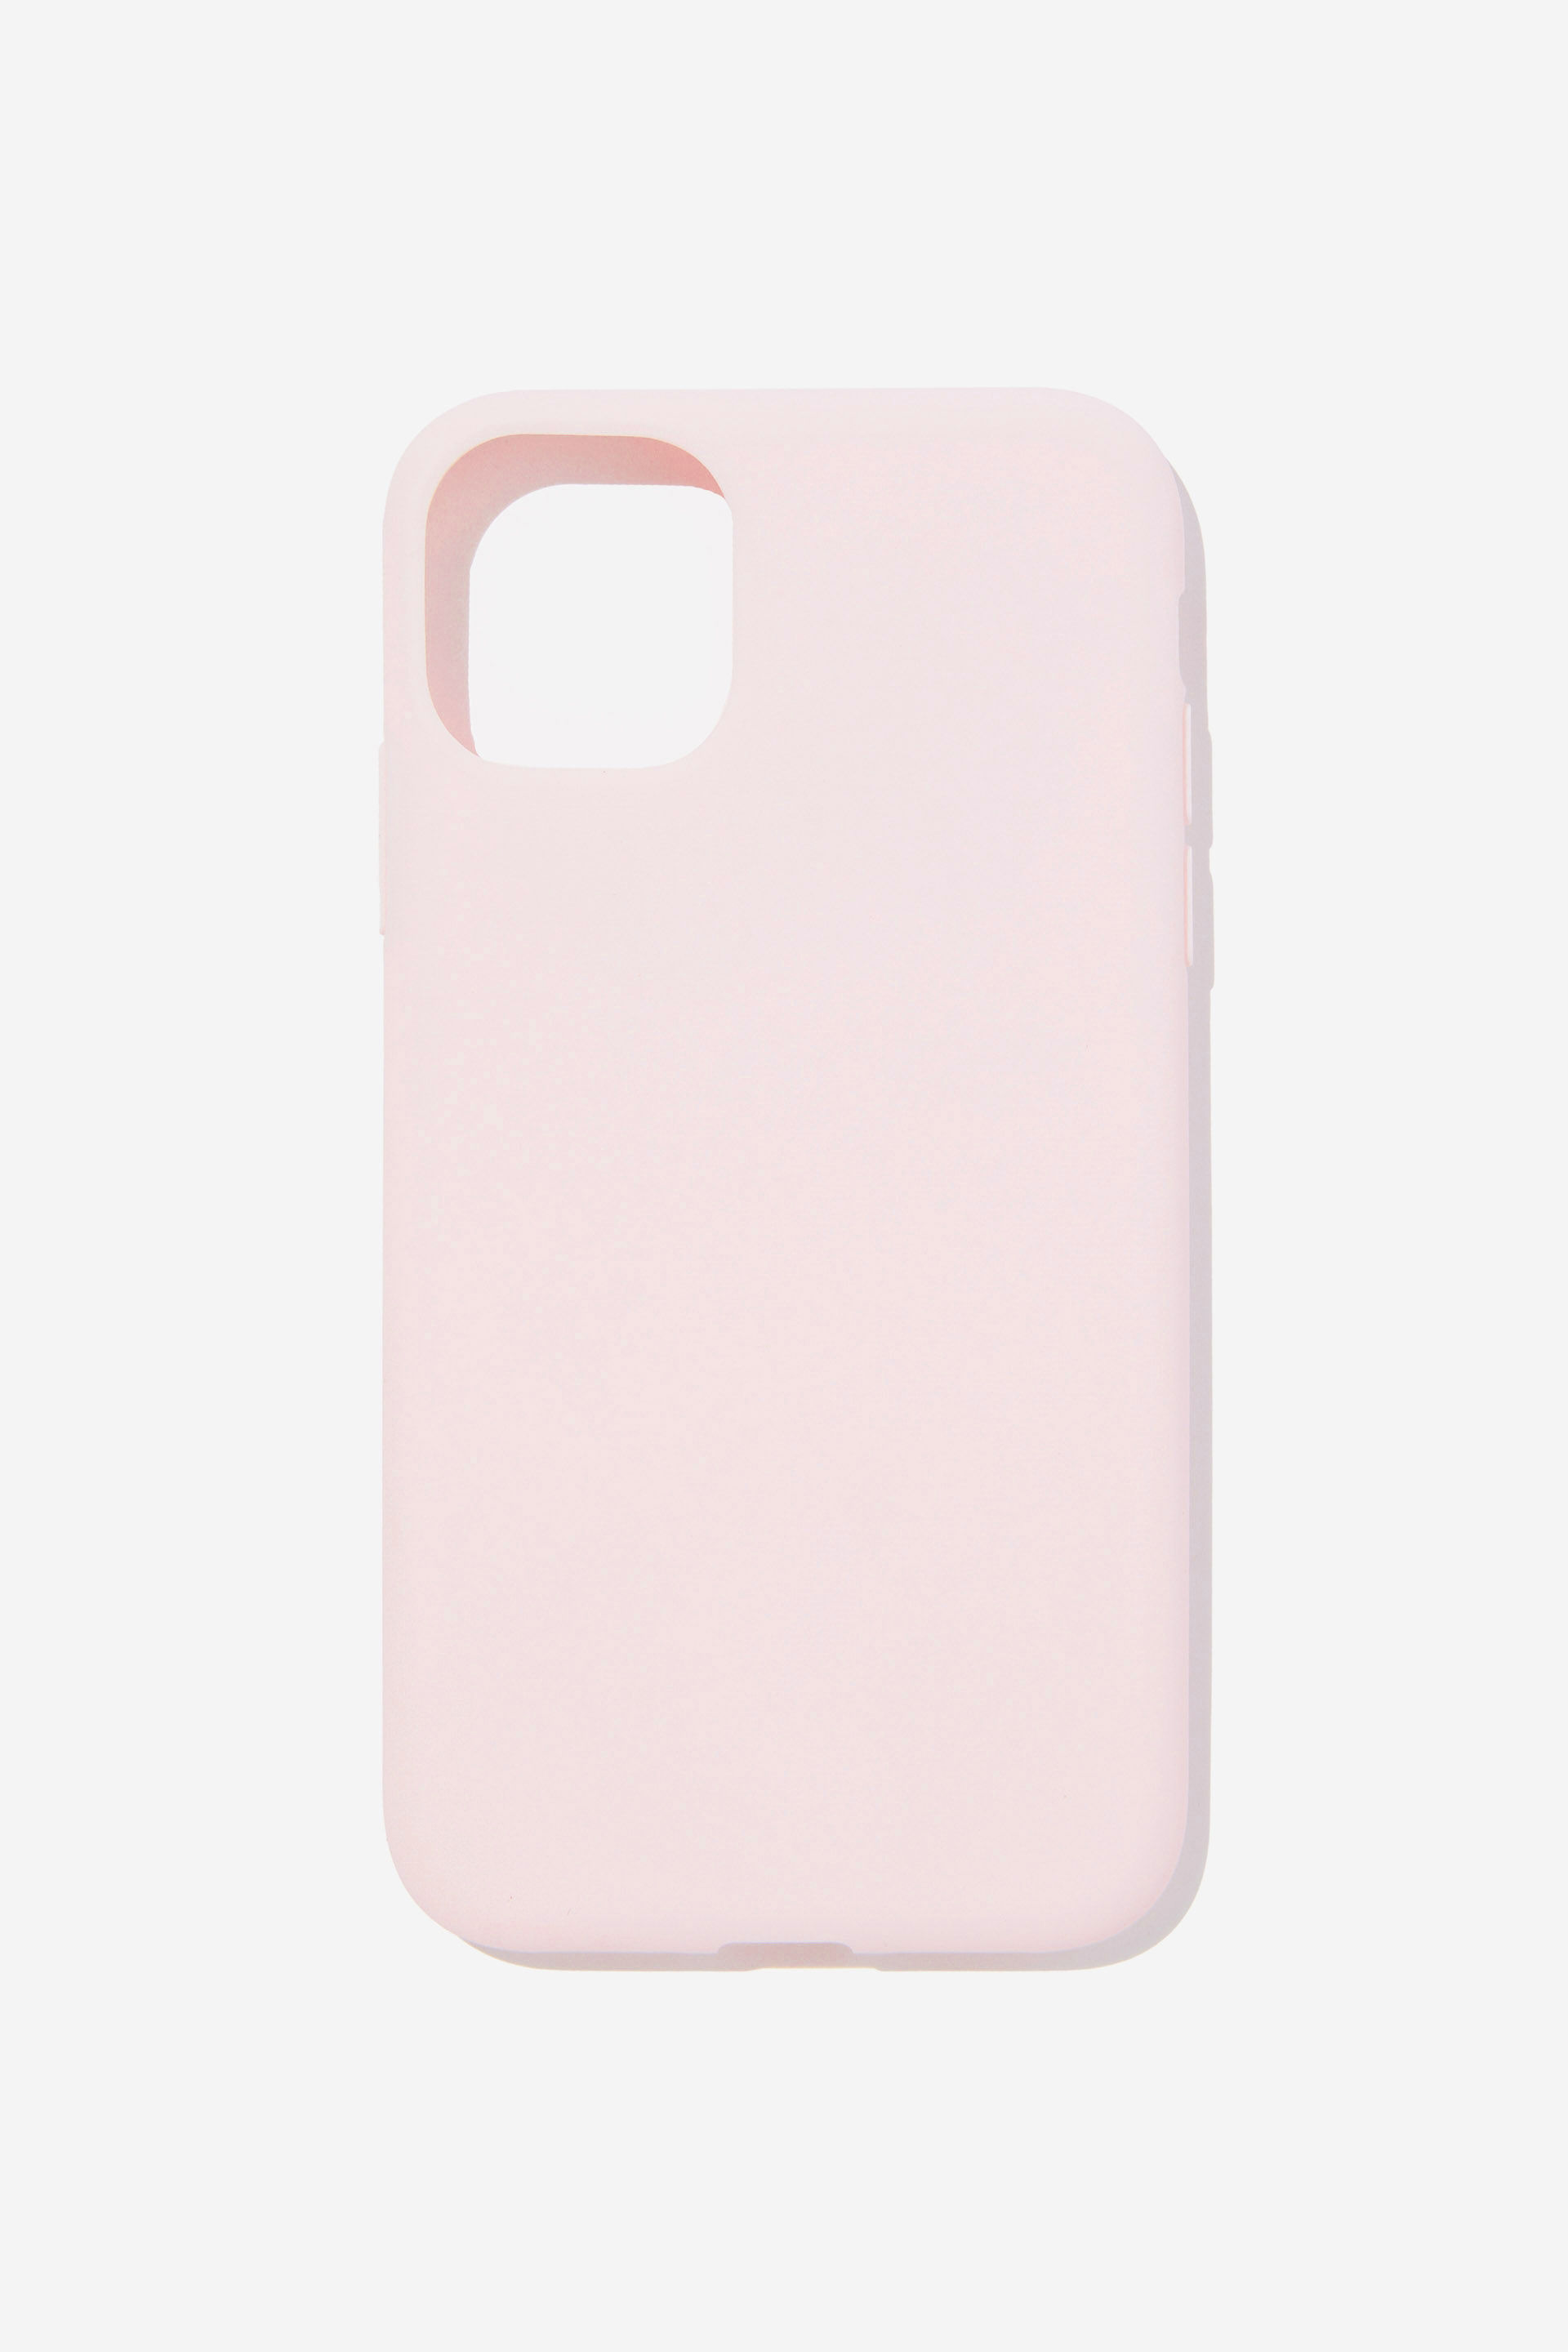 Typo - Recycled Phone Case iPhone 11 - Ballet blush